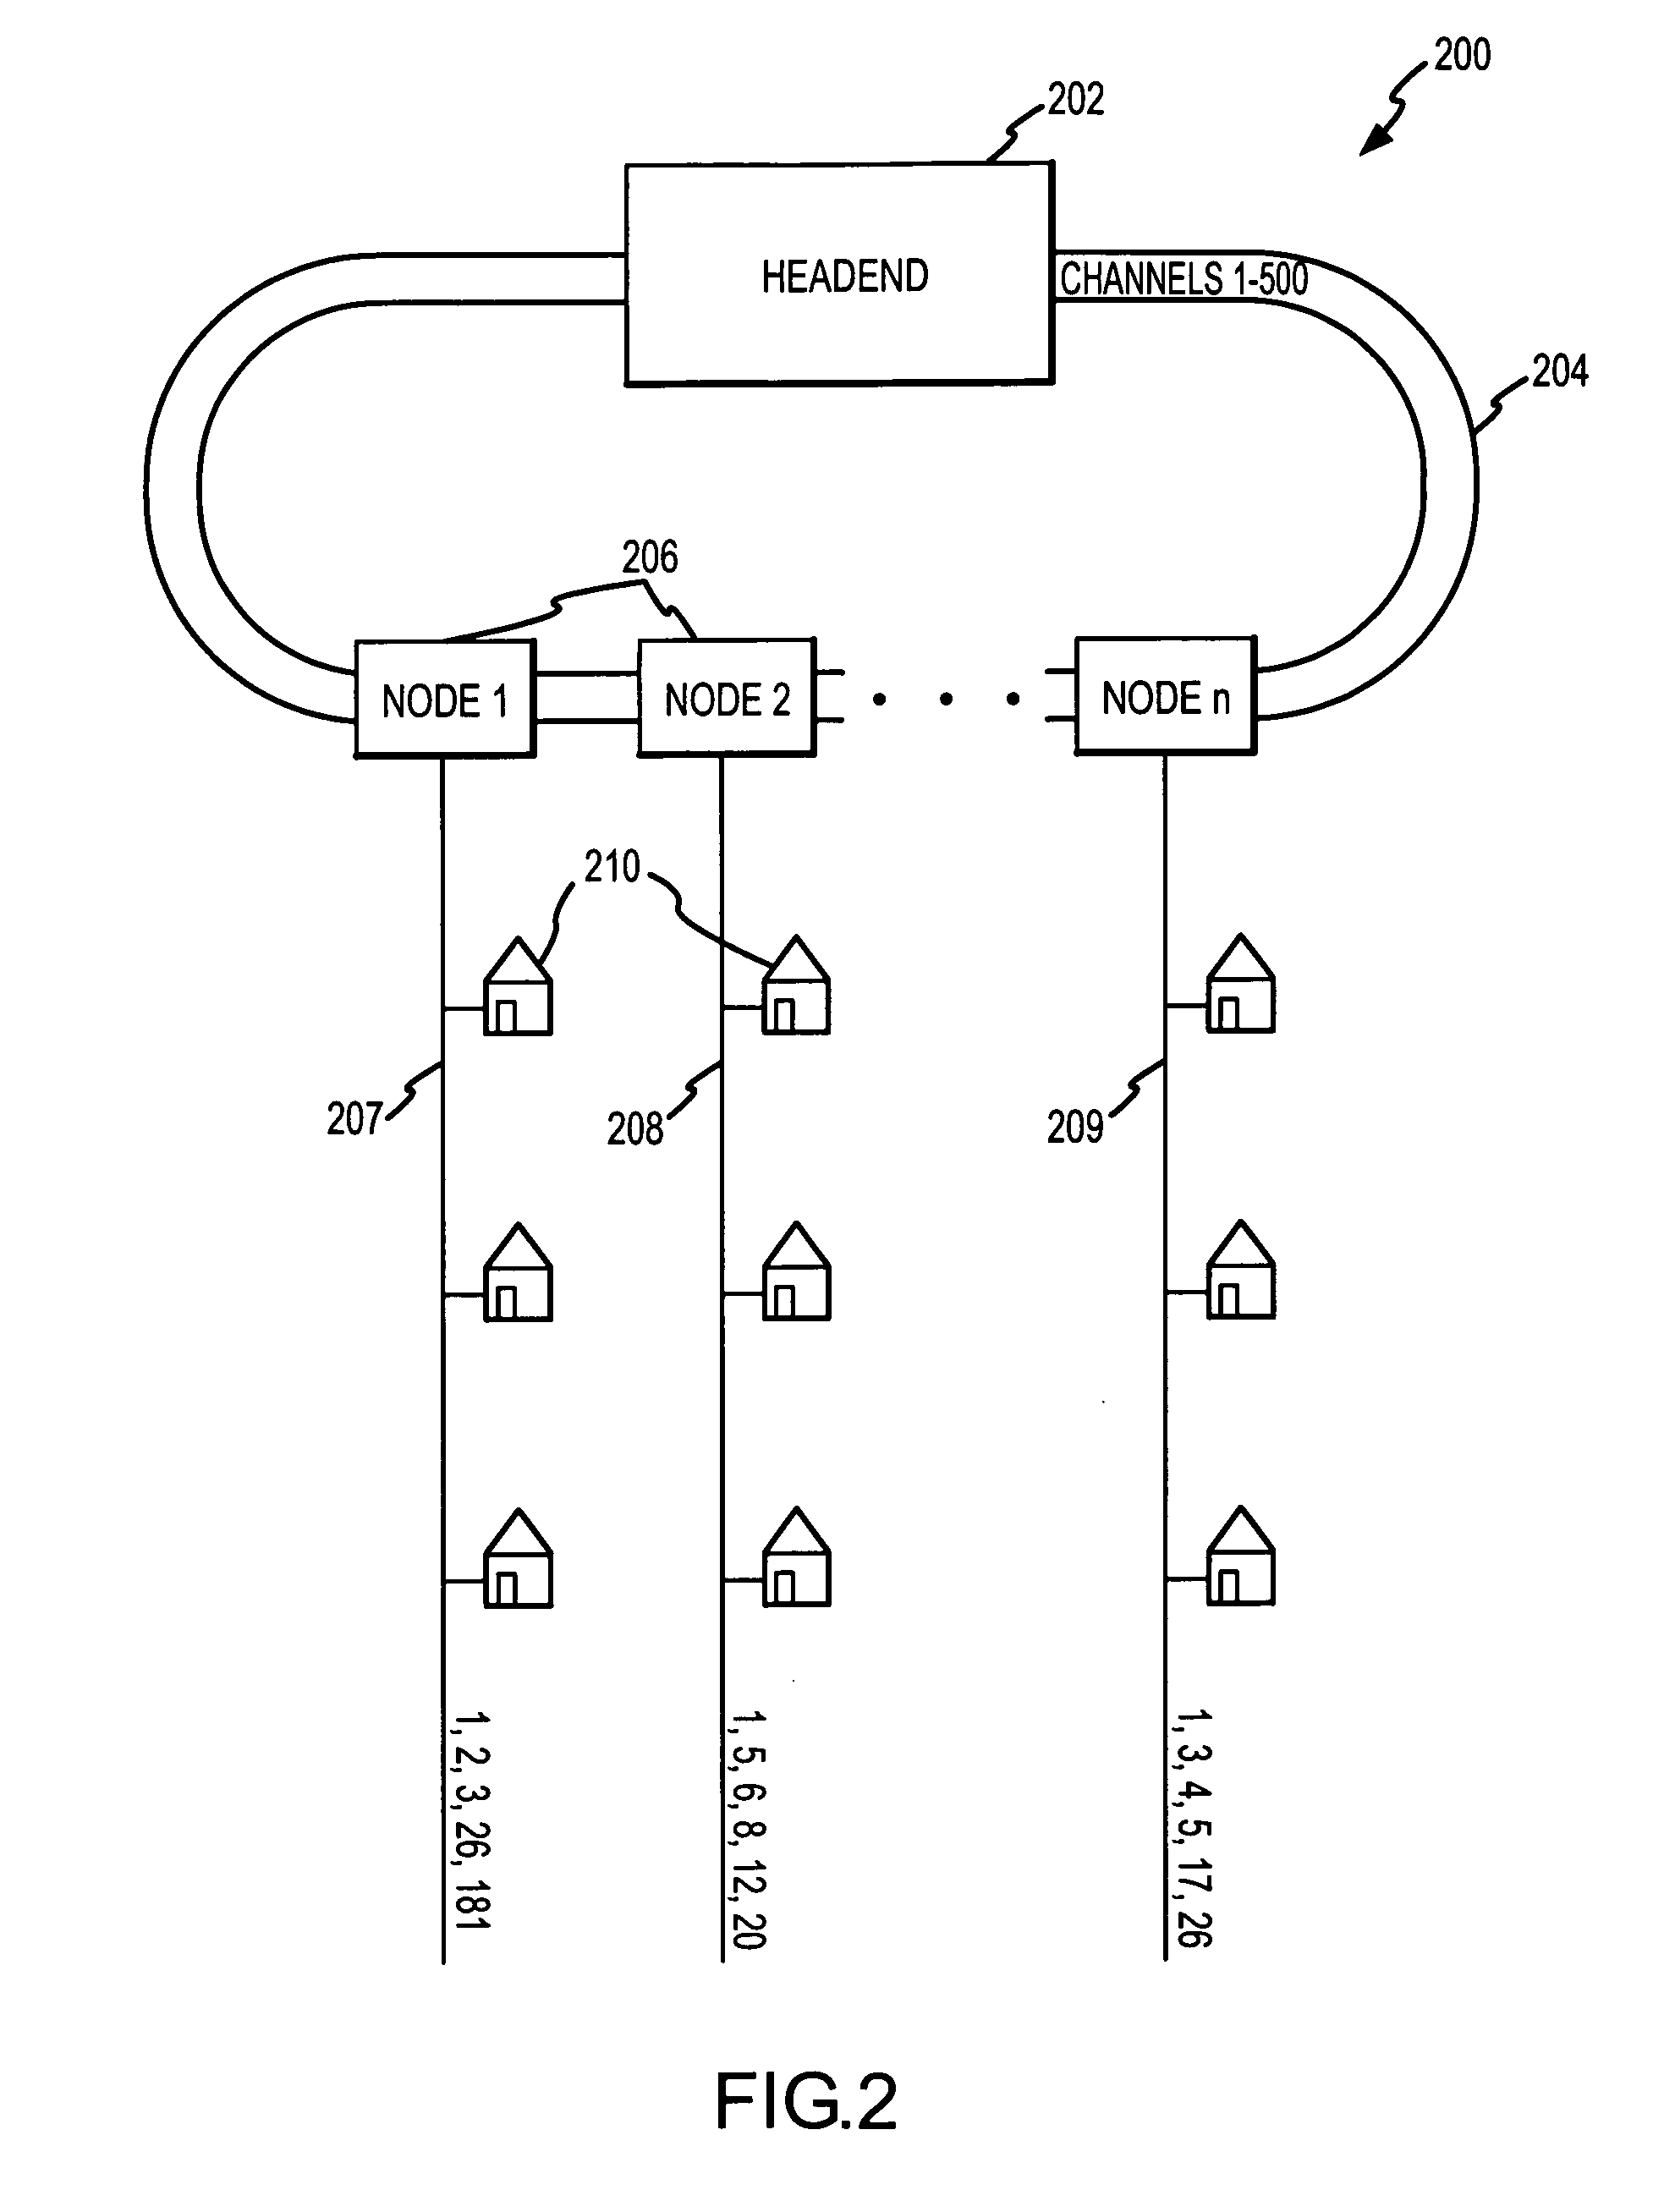 Content selection based on signaling from customer premises equipment in a broadcast network